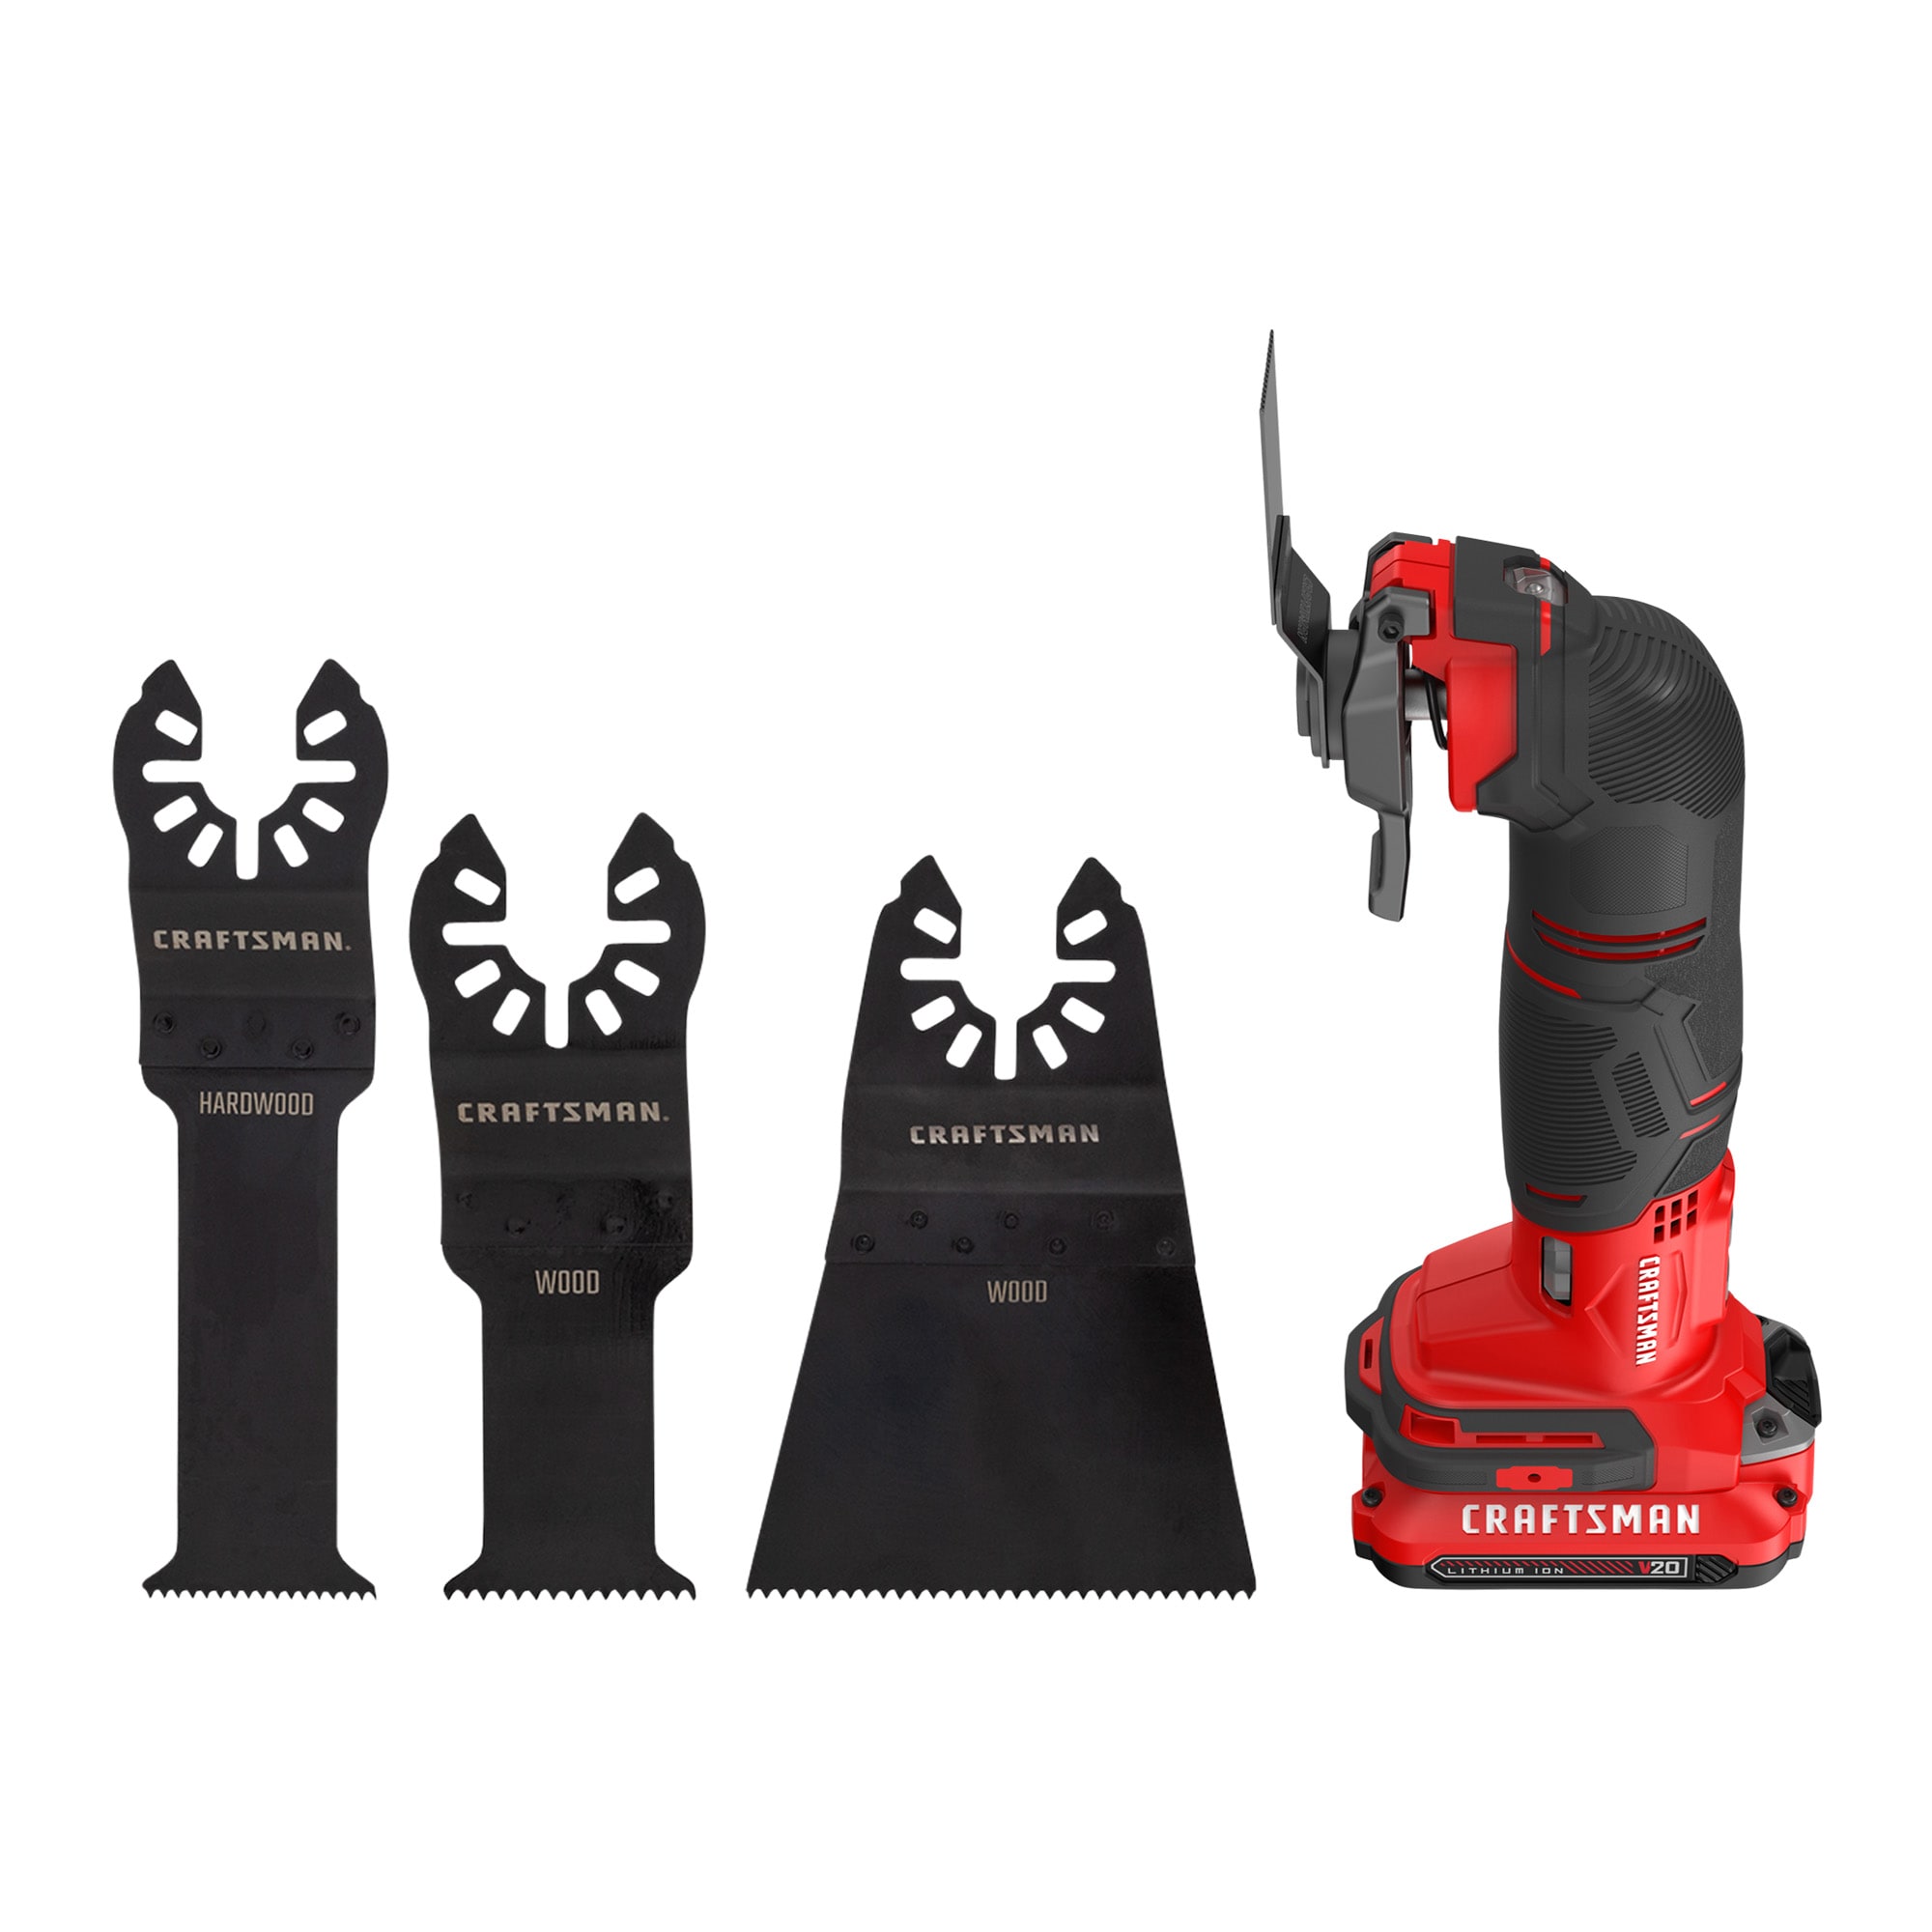 CRAFTSMAN 3-Pack High Carbon Steel Oscillating Tool Blade & V20 11-Piece 20-Volt Max Variable Speed Oscillating Multi-Tool Kit with Soft Case